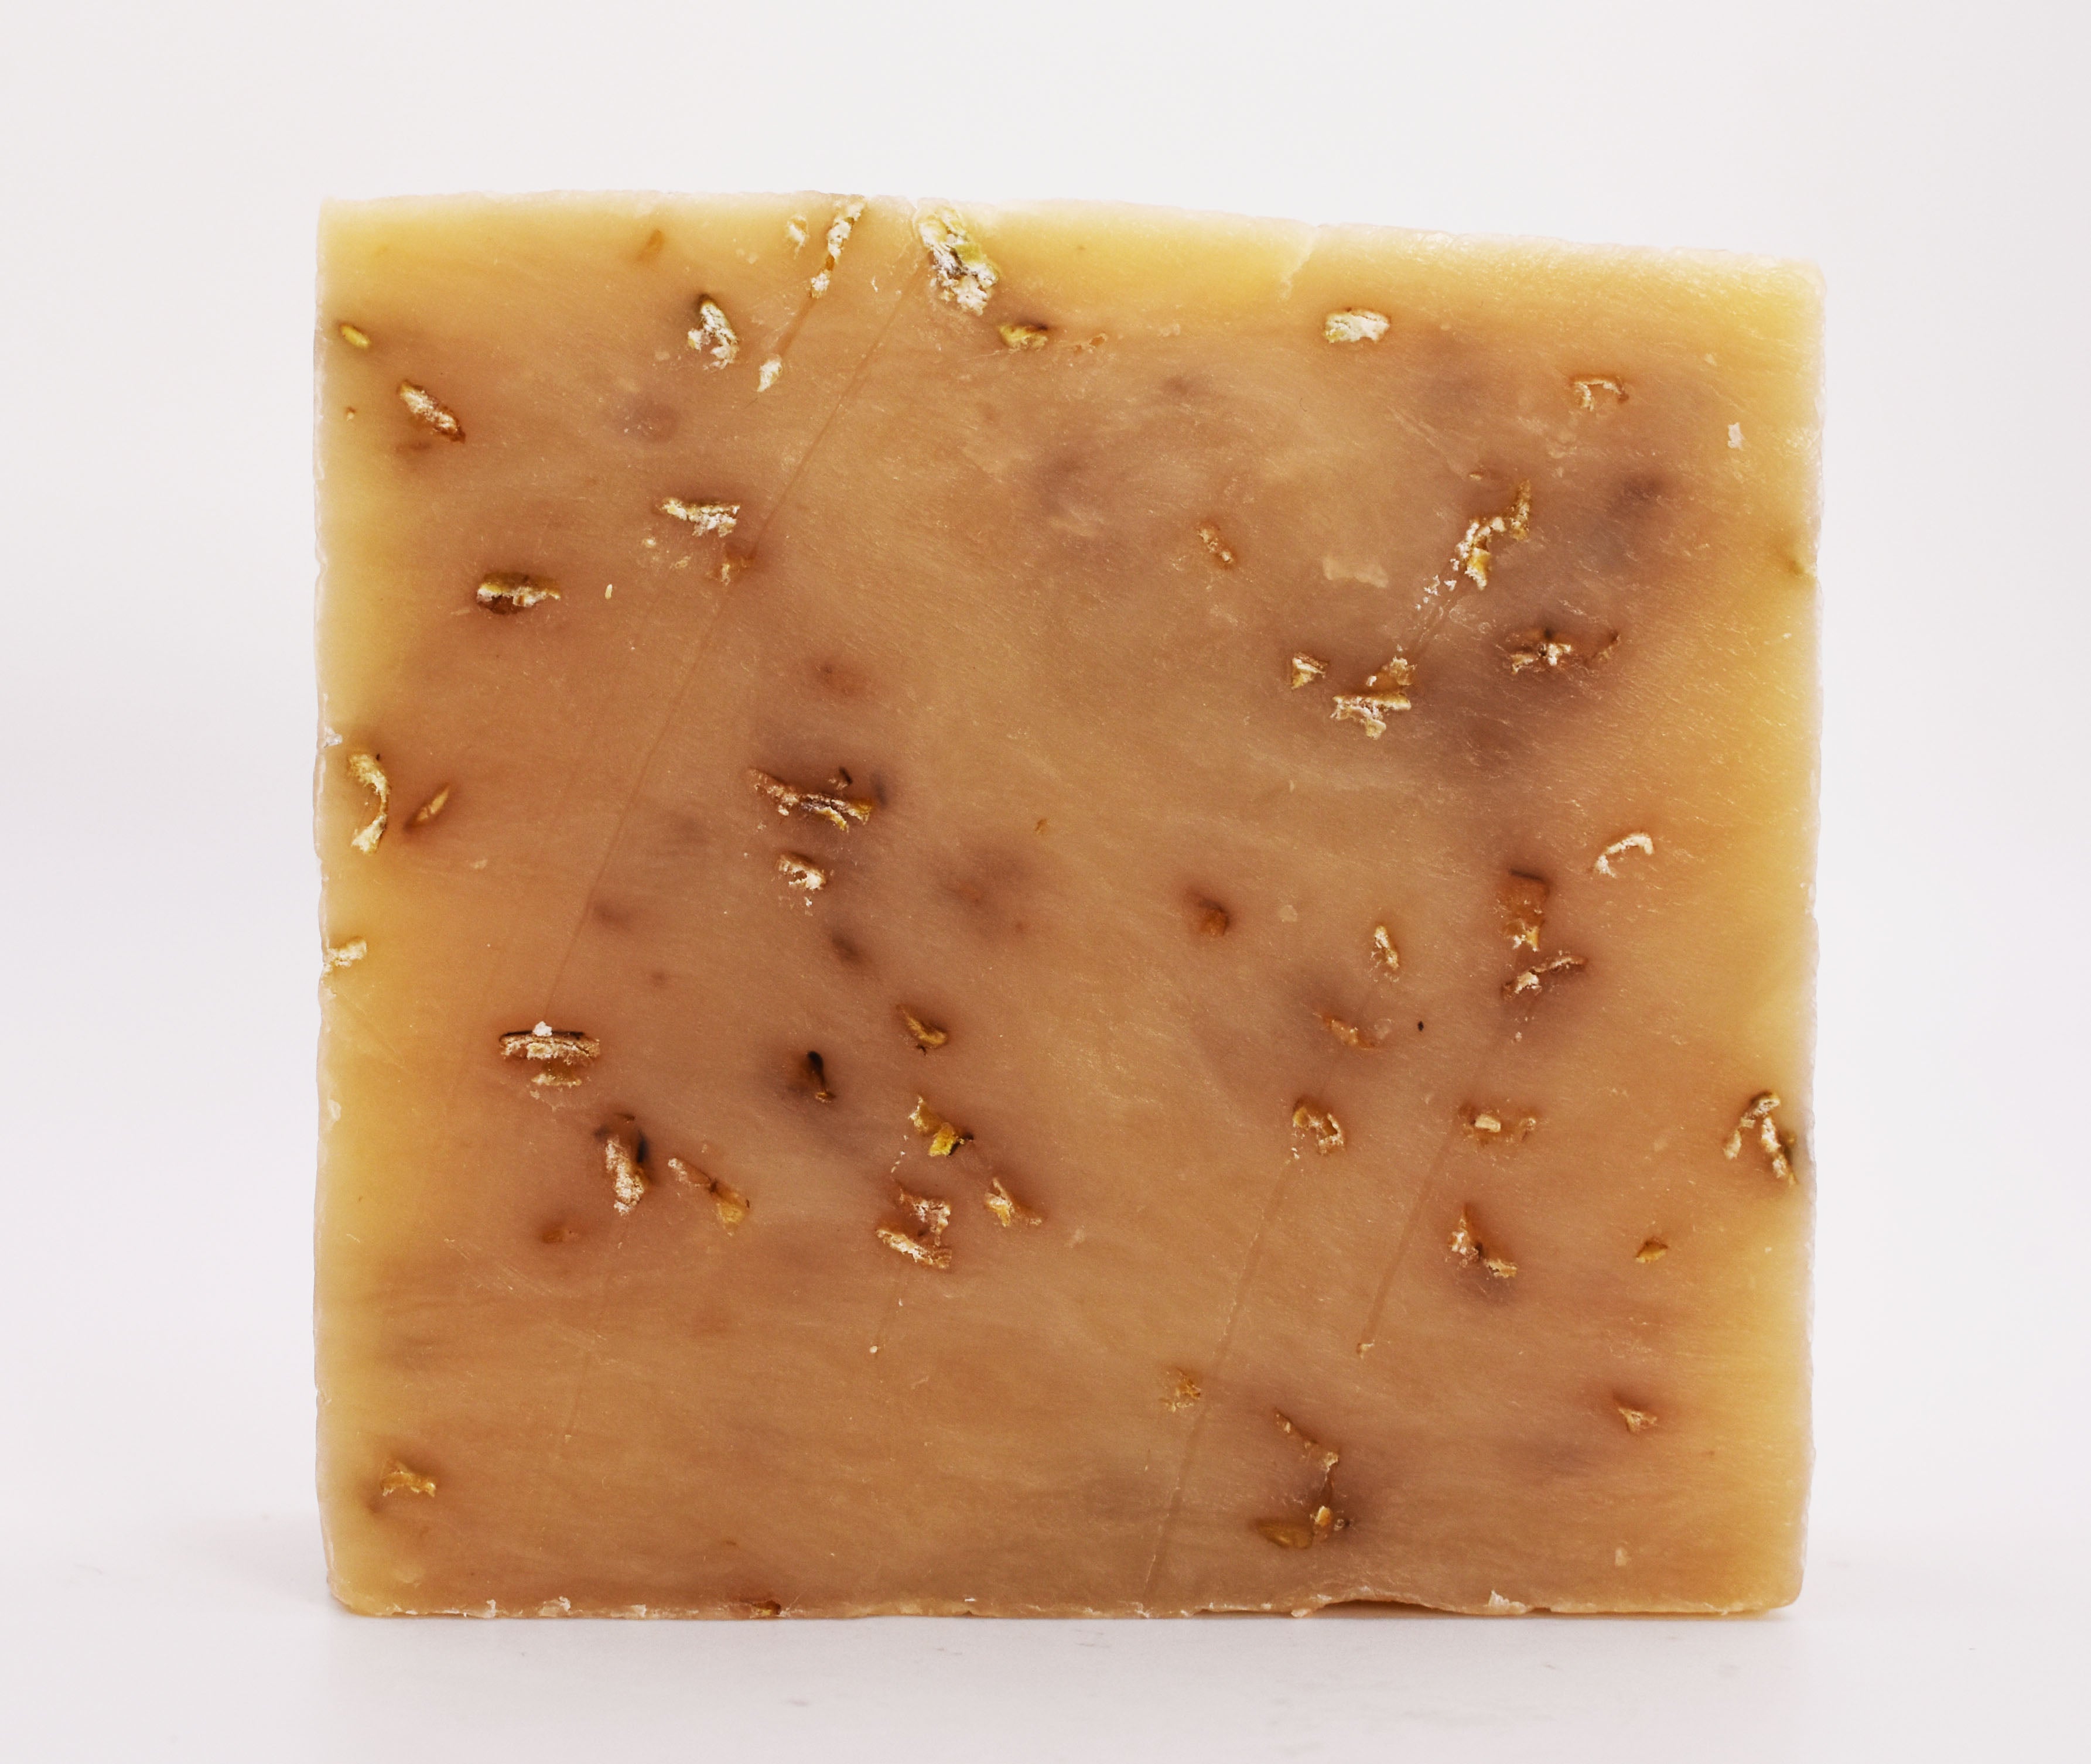 Unscented Oatmeal Goat Milk Soap